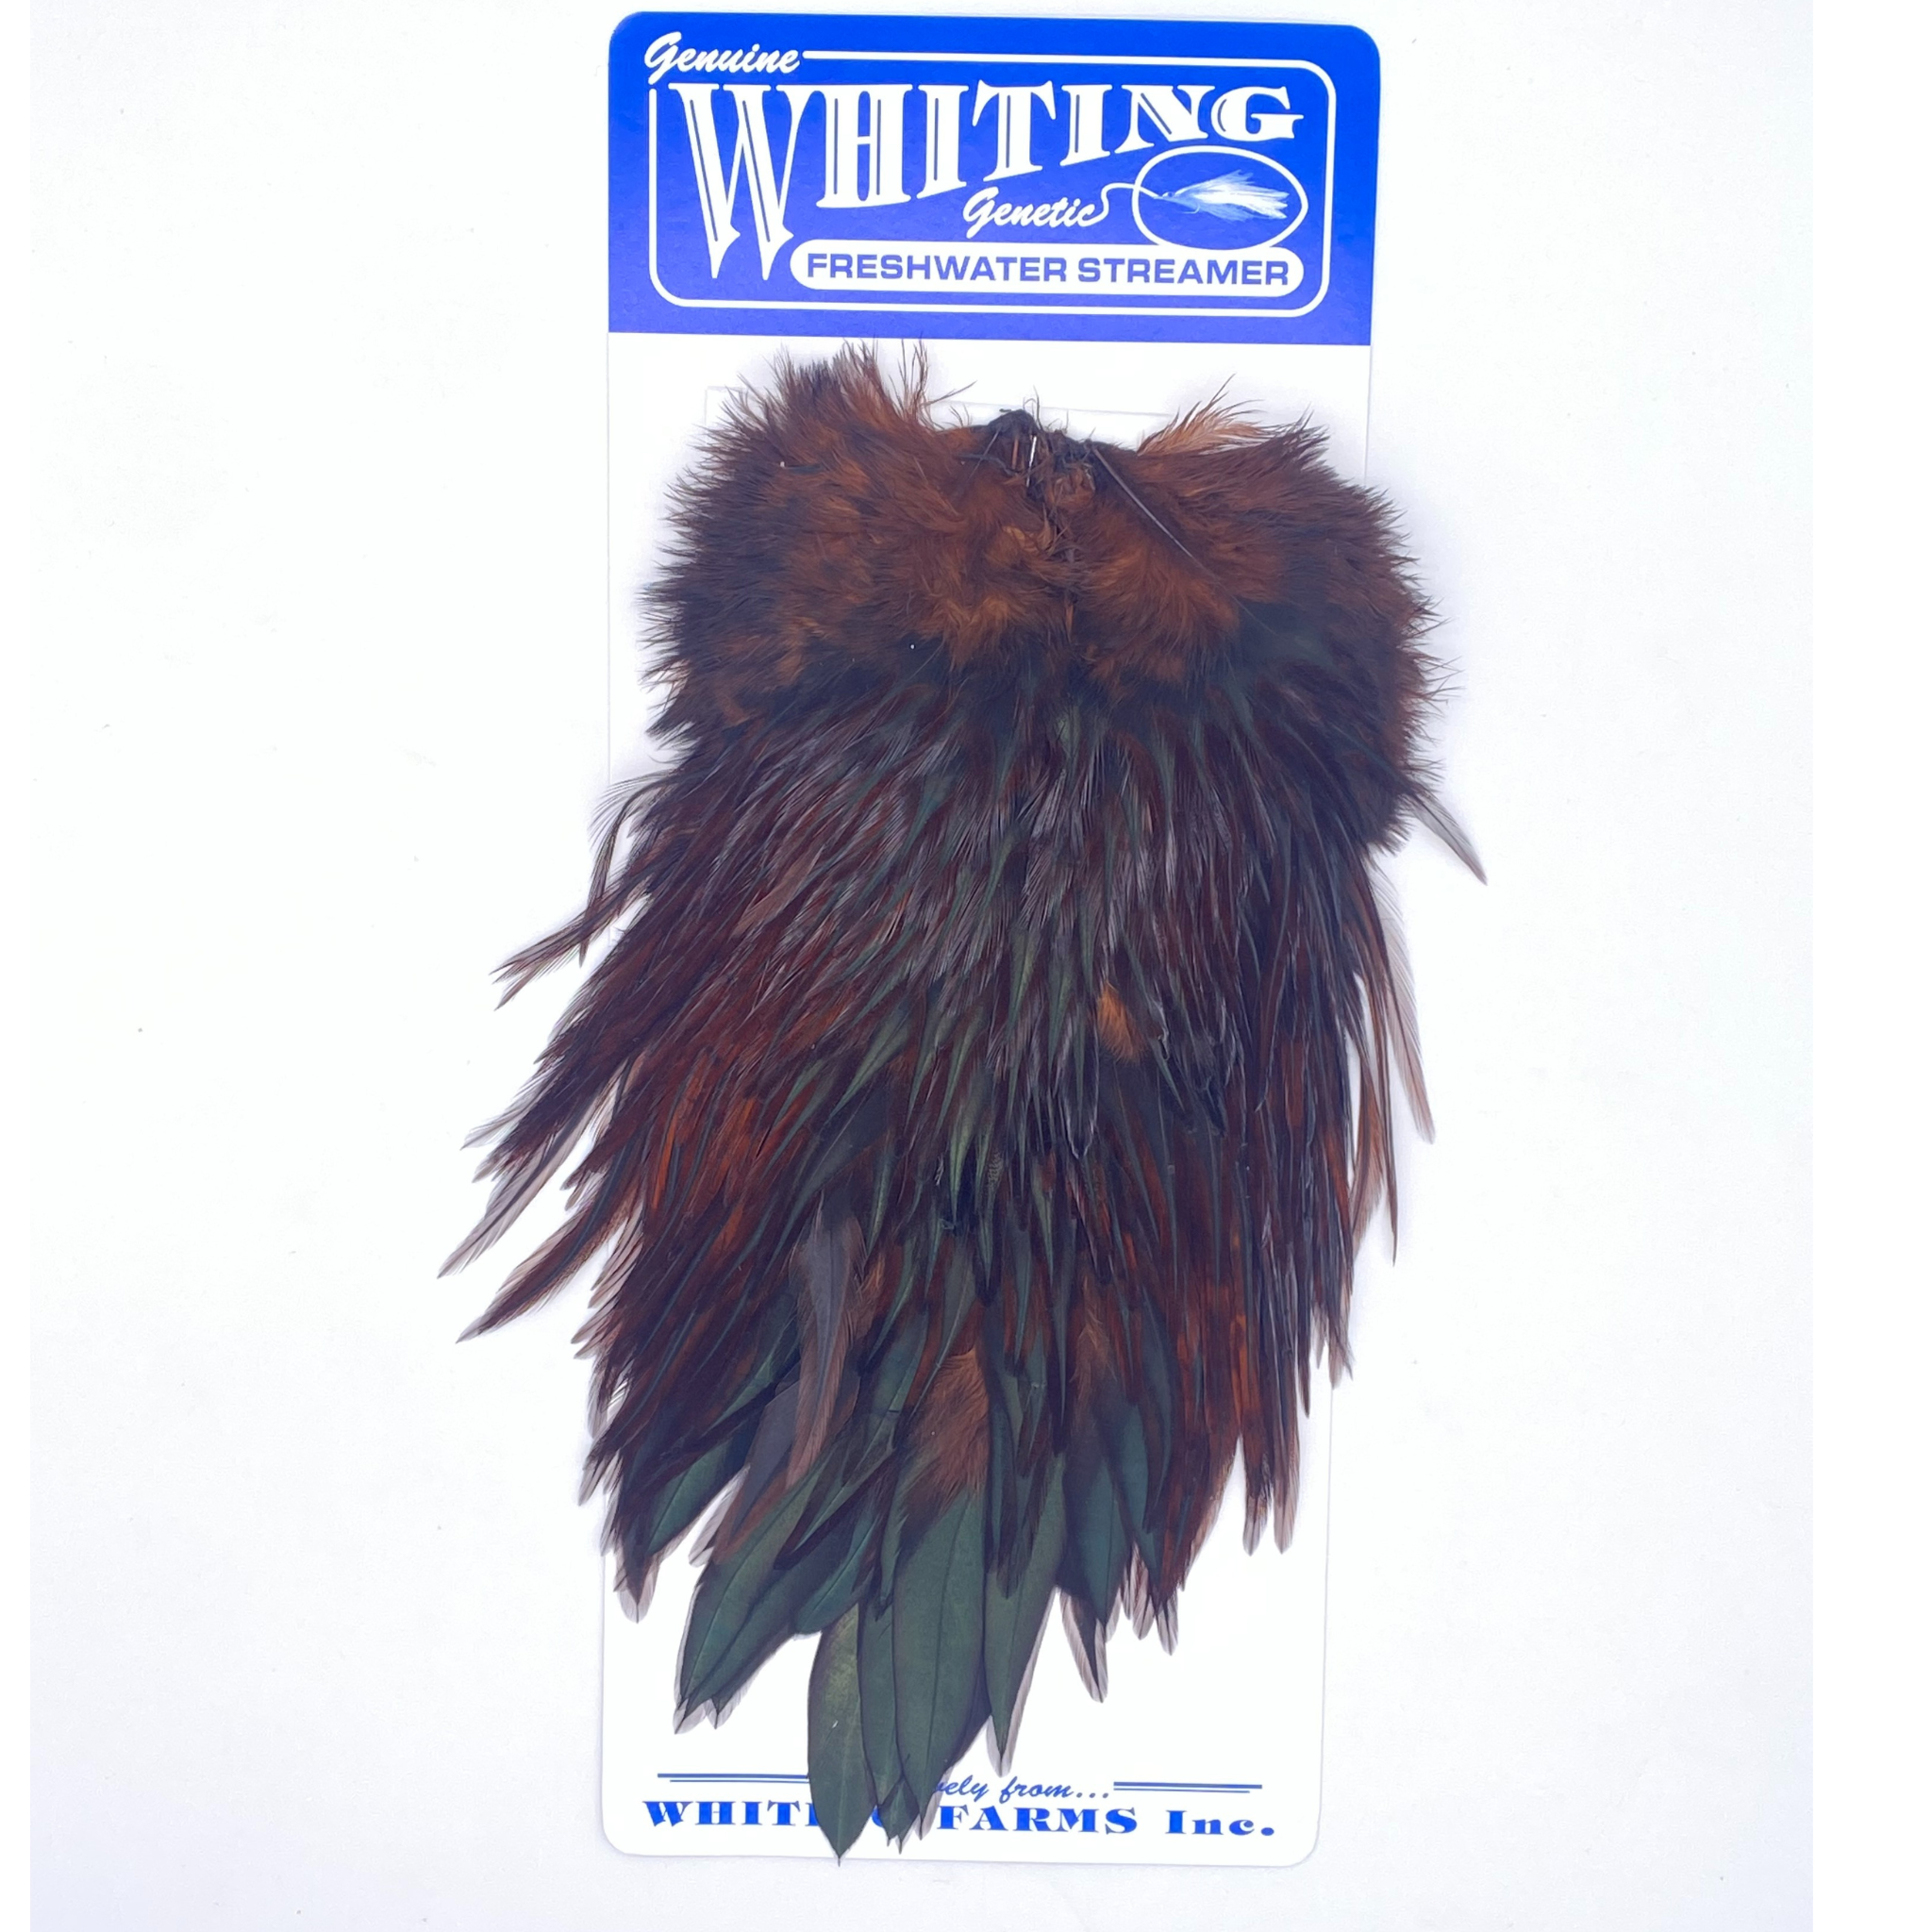 Whiting Freshwater Streamer Rooster Saddle